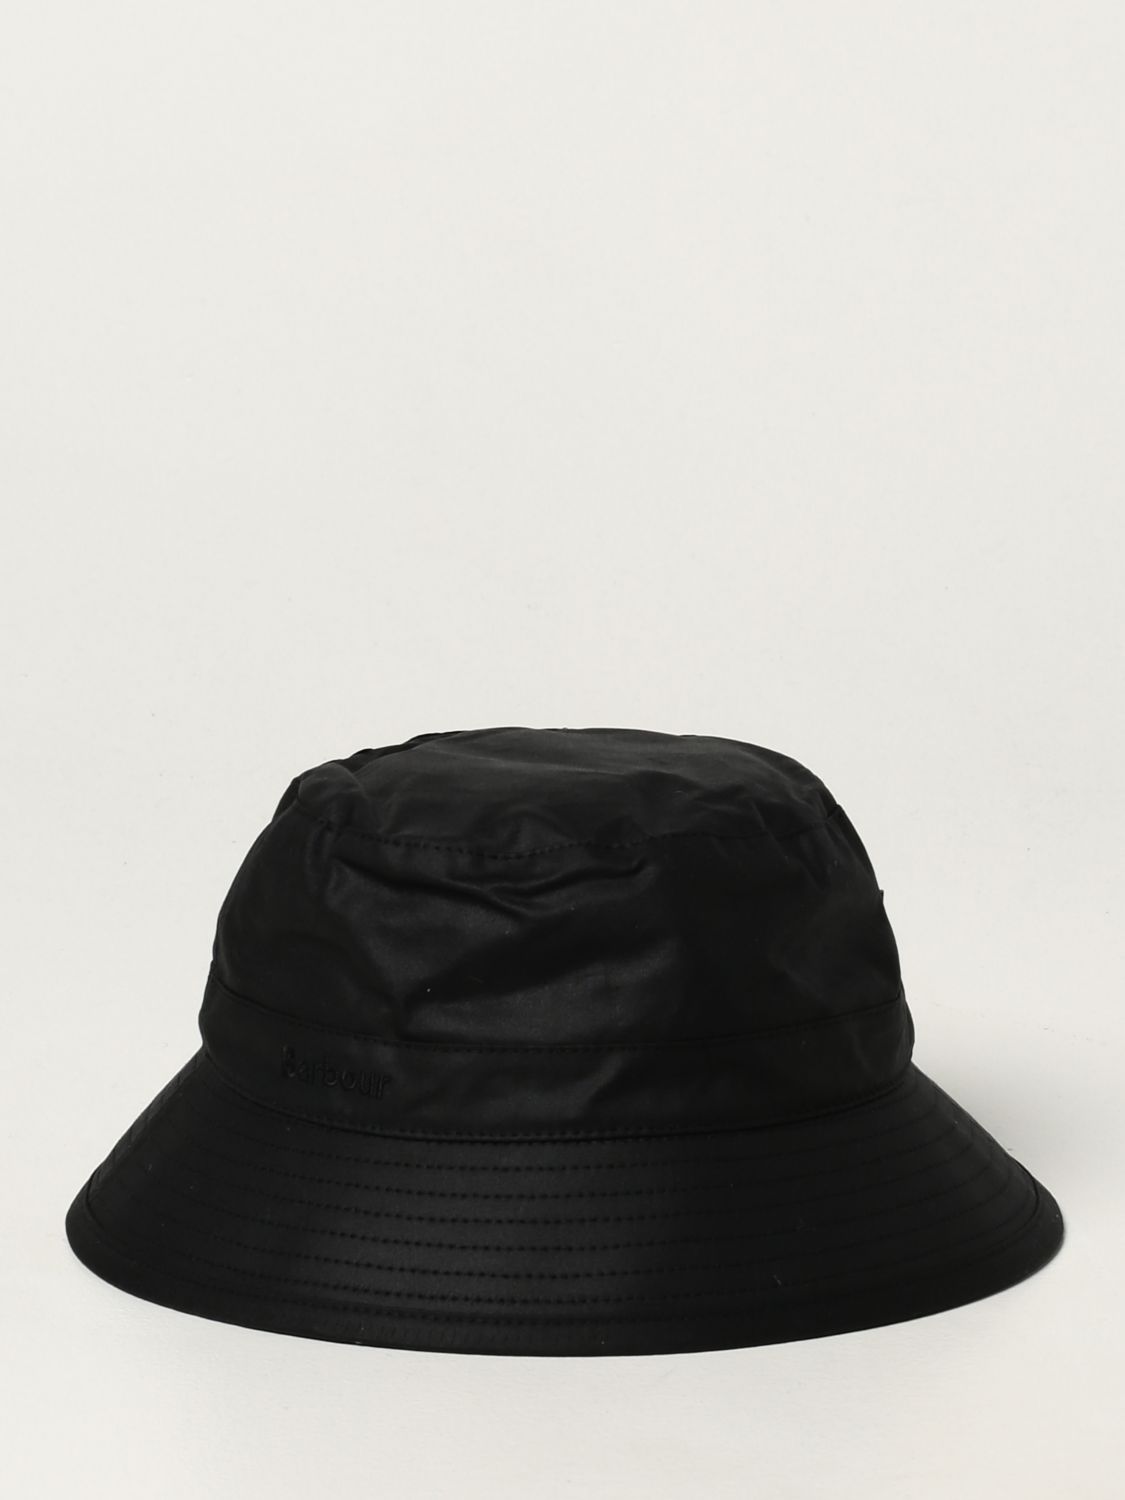 BARBOUR: fisherman hat in waxed cotton - Black | Barbour hat MHA0001 ...